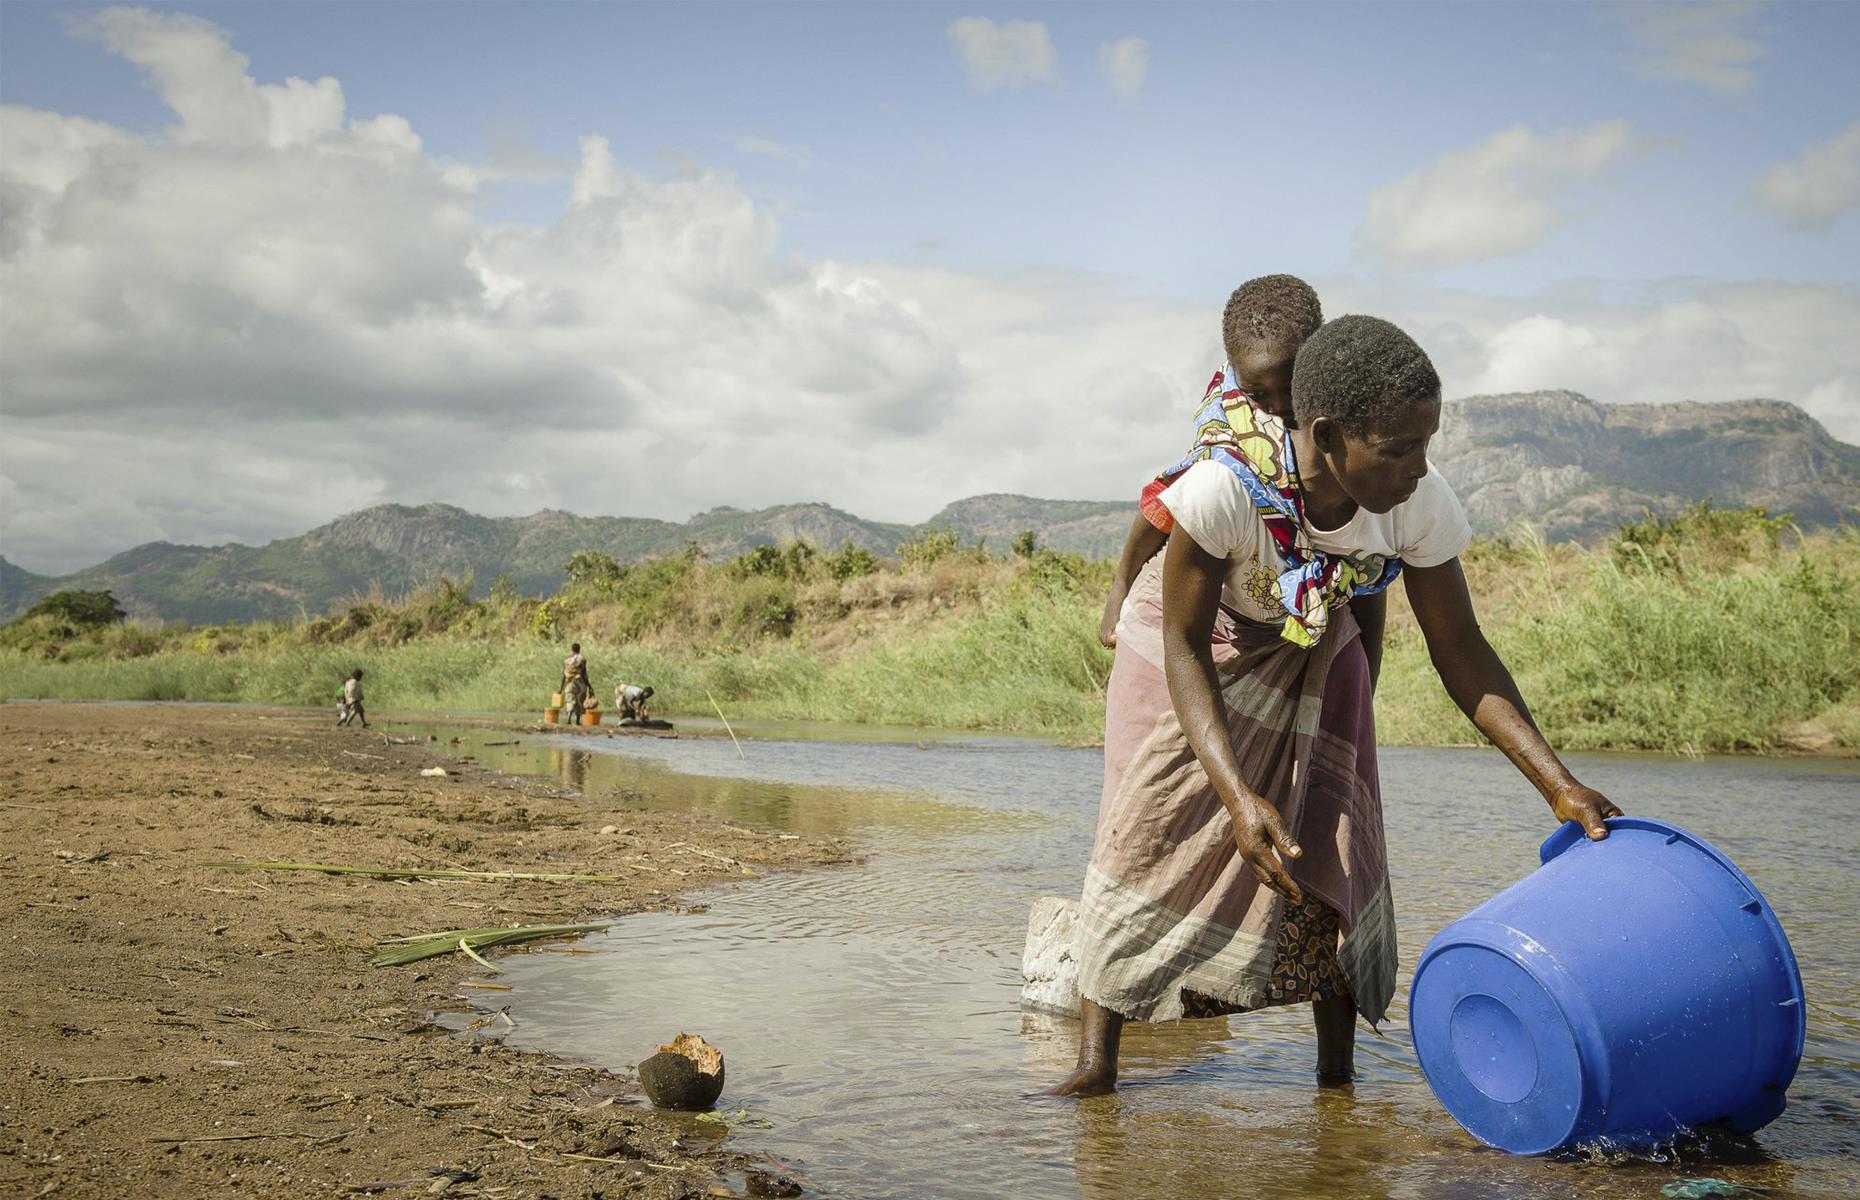 785 million people don’t have access to clean water